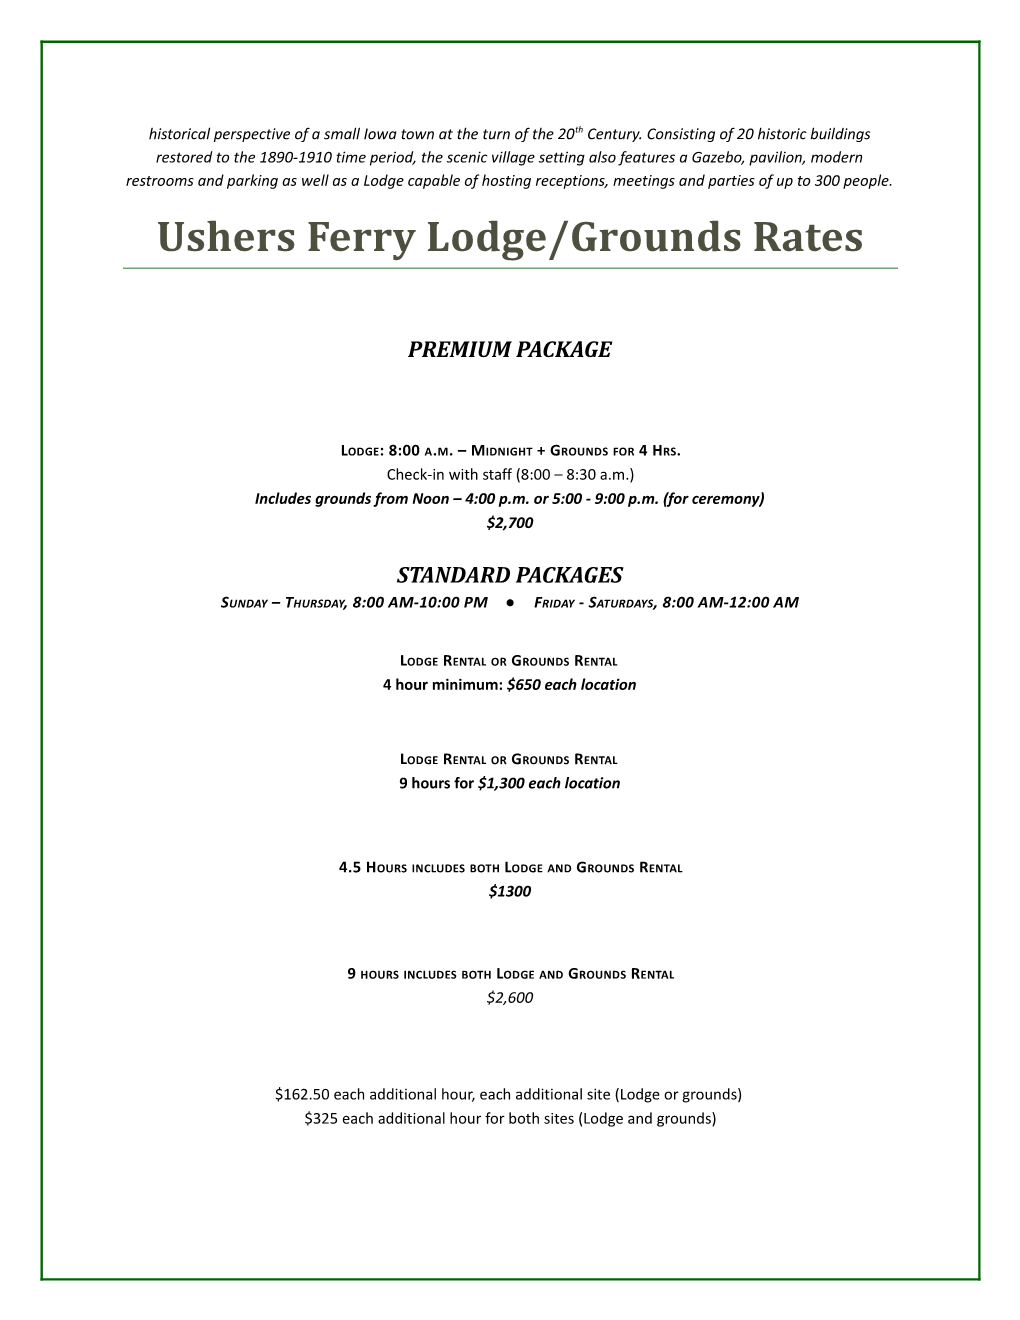 Lodge and Ground Rental Information